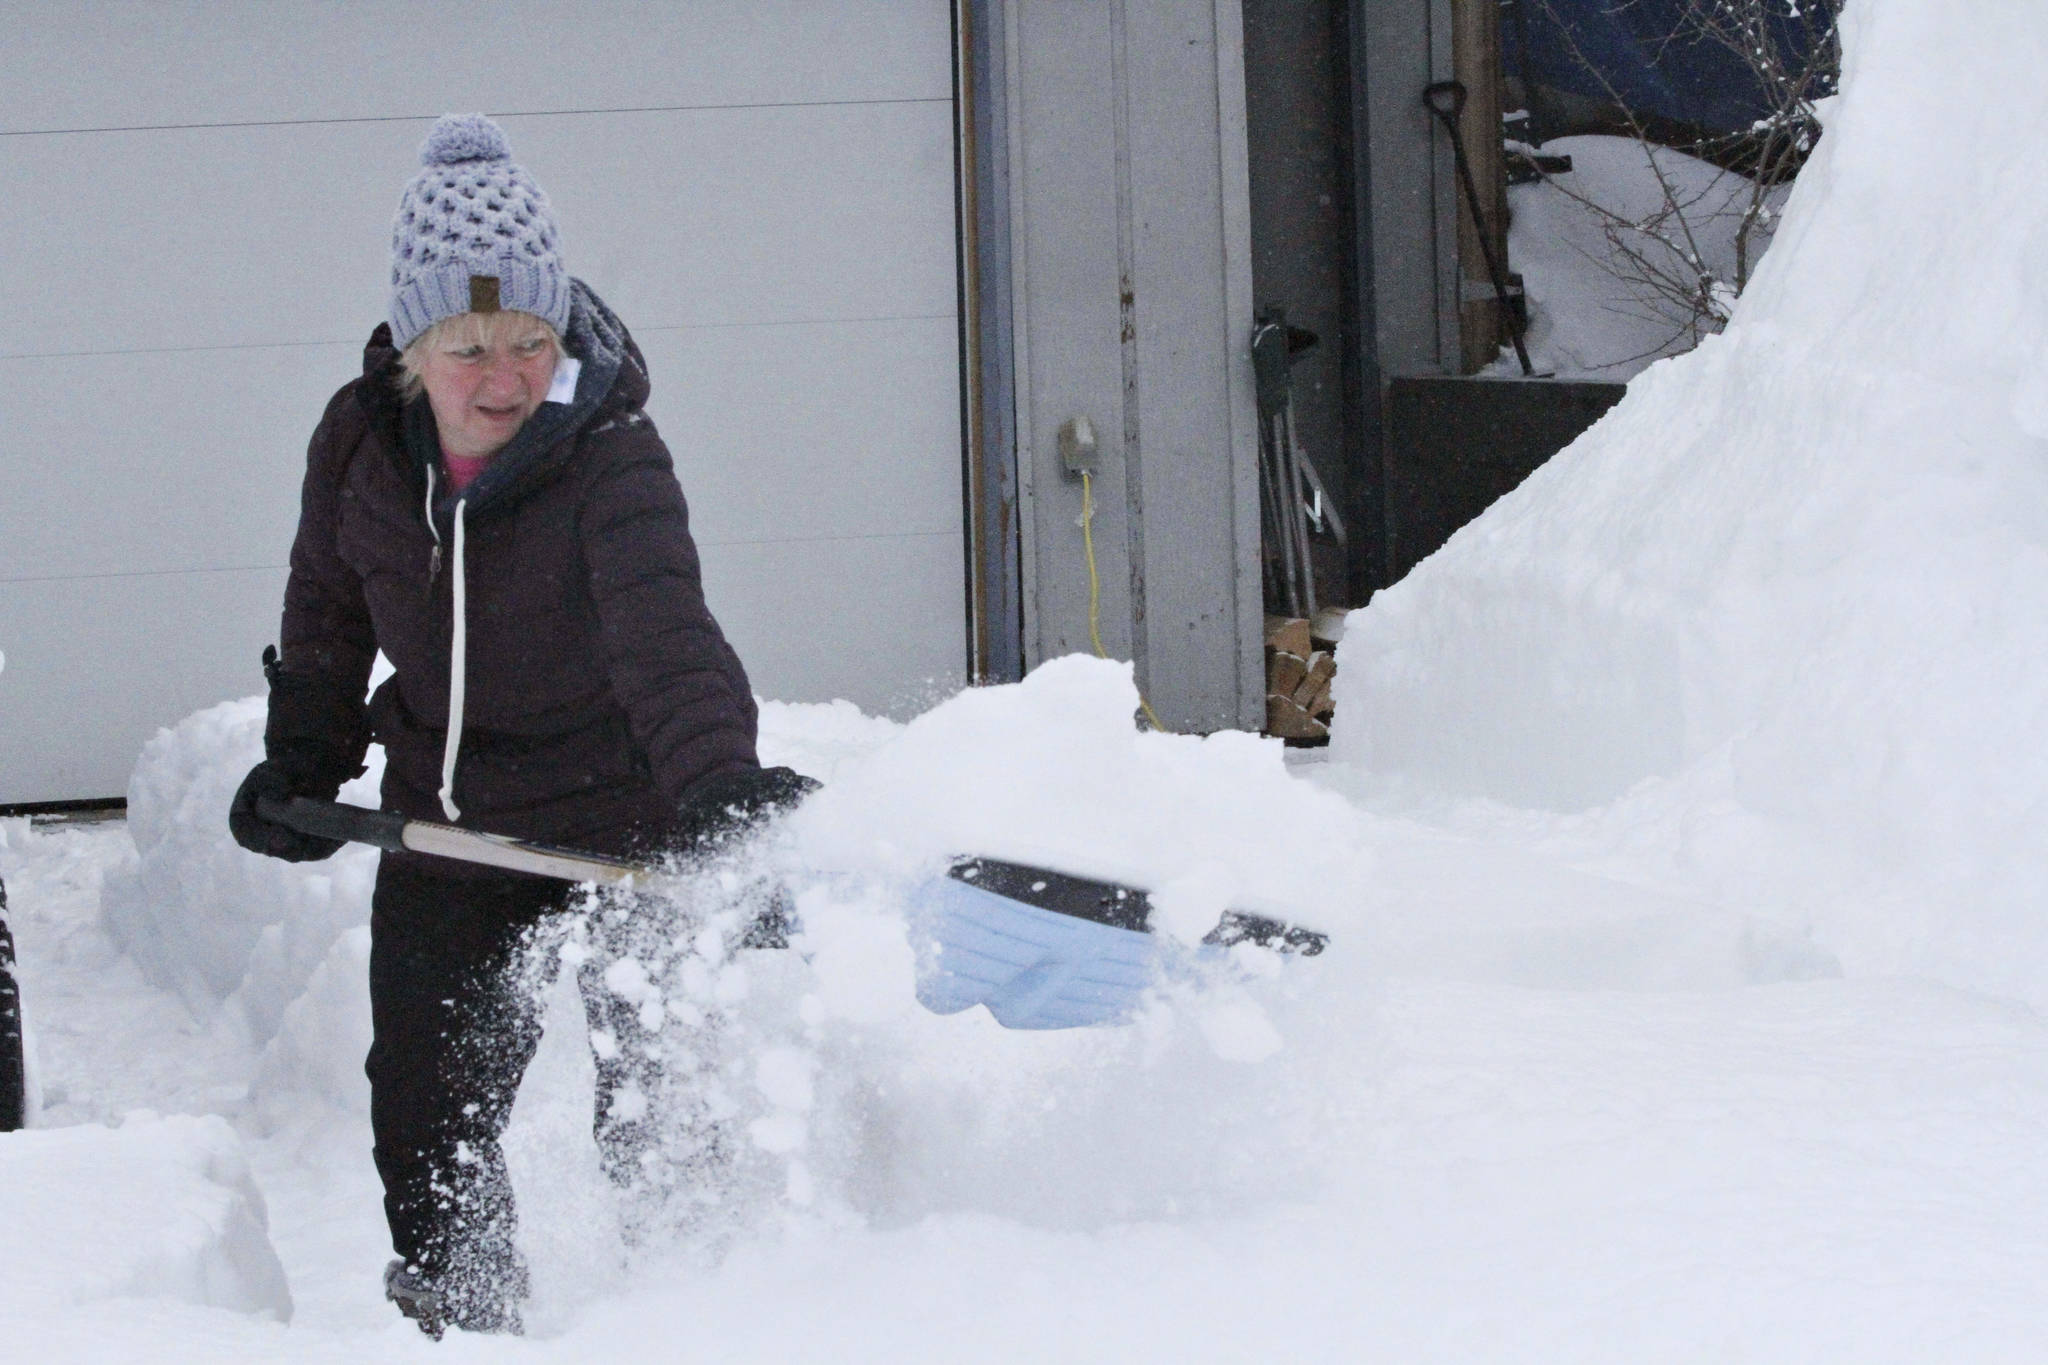 Judi Westfall shovels snow at her home in Anchorage, Alaska, on Thursday, March 11, 2021. Residents in some parts of Alaska’s largest city woke Thursday to a surprise: up to 18 new inches of snow. (AP Photo/Mark Thiessen)